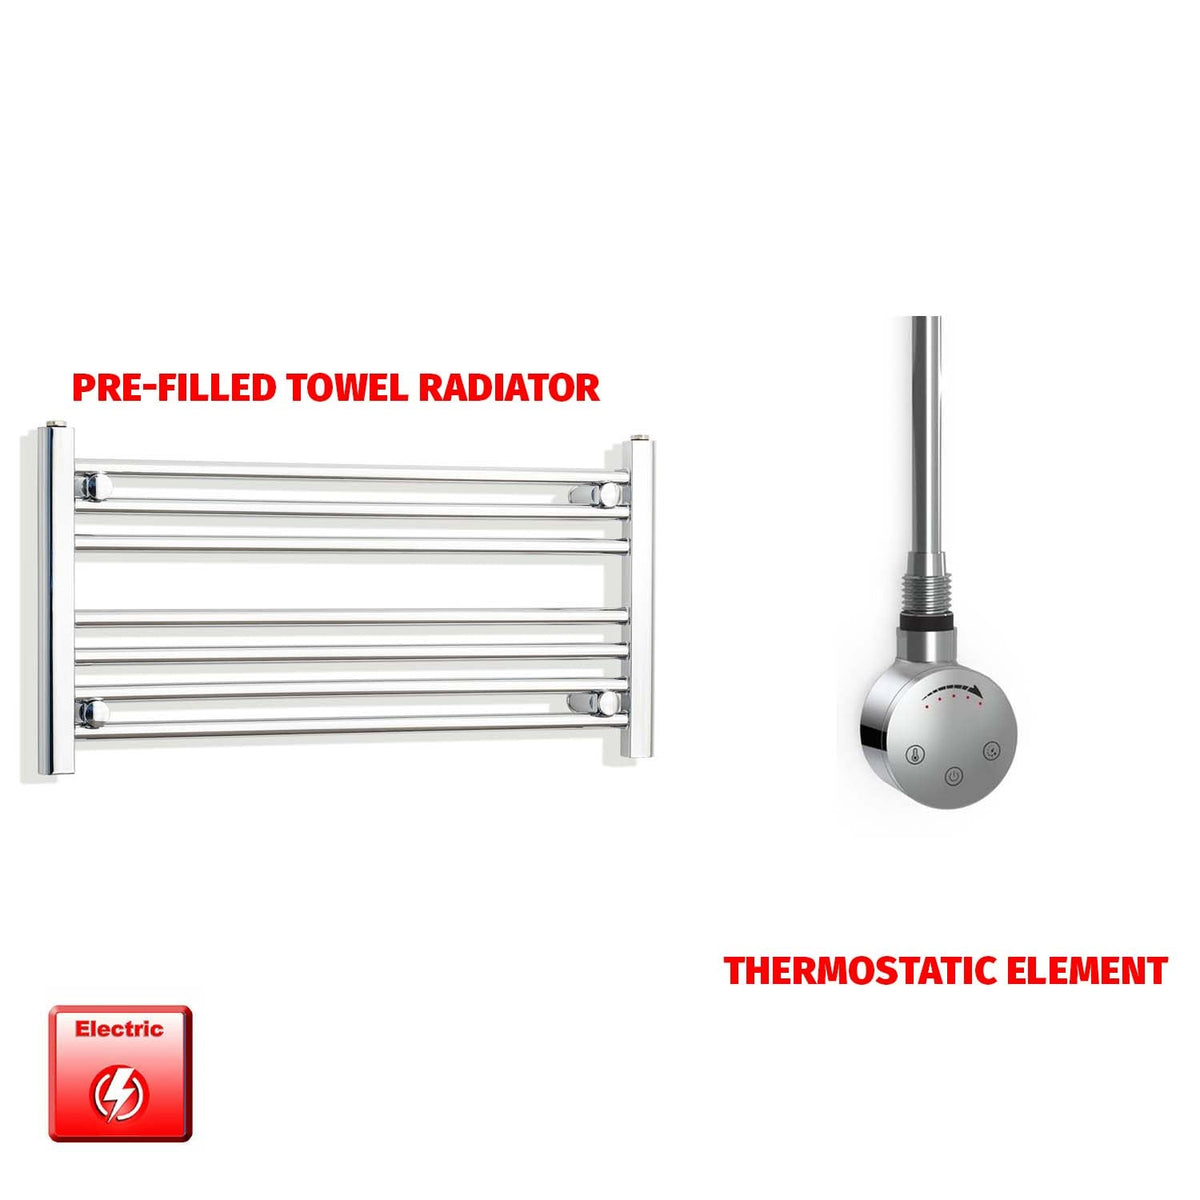 400 x 900 Pre-Filled Electric Heated Towel Radiator Straight Chrome SMR Thermosatic element no timer